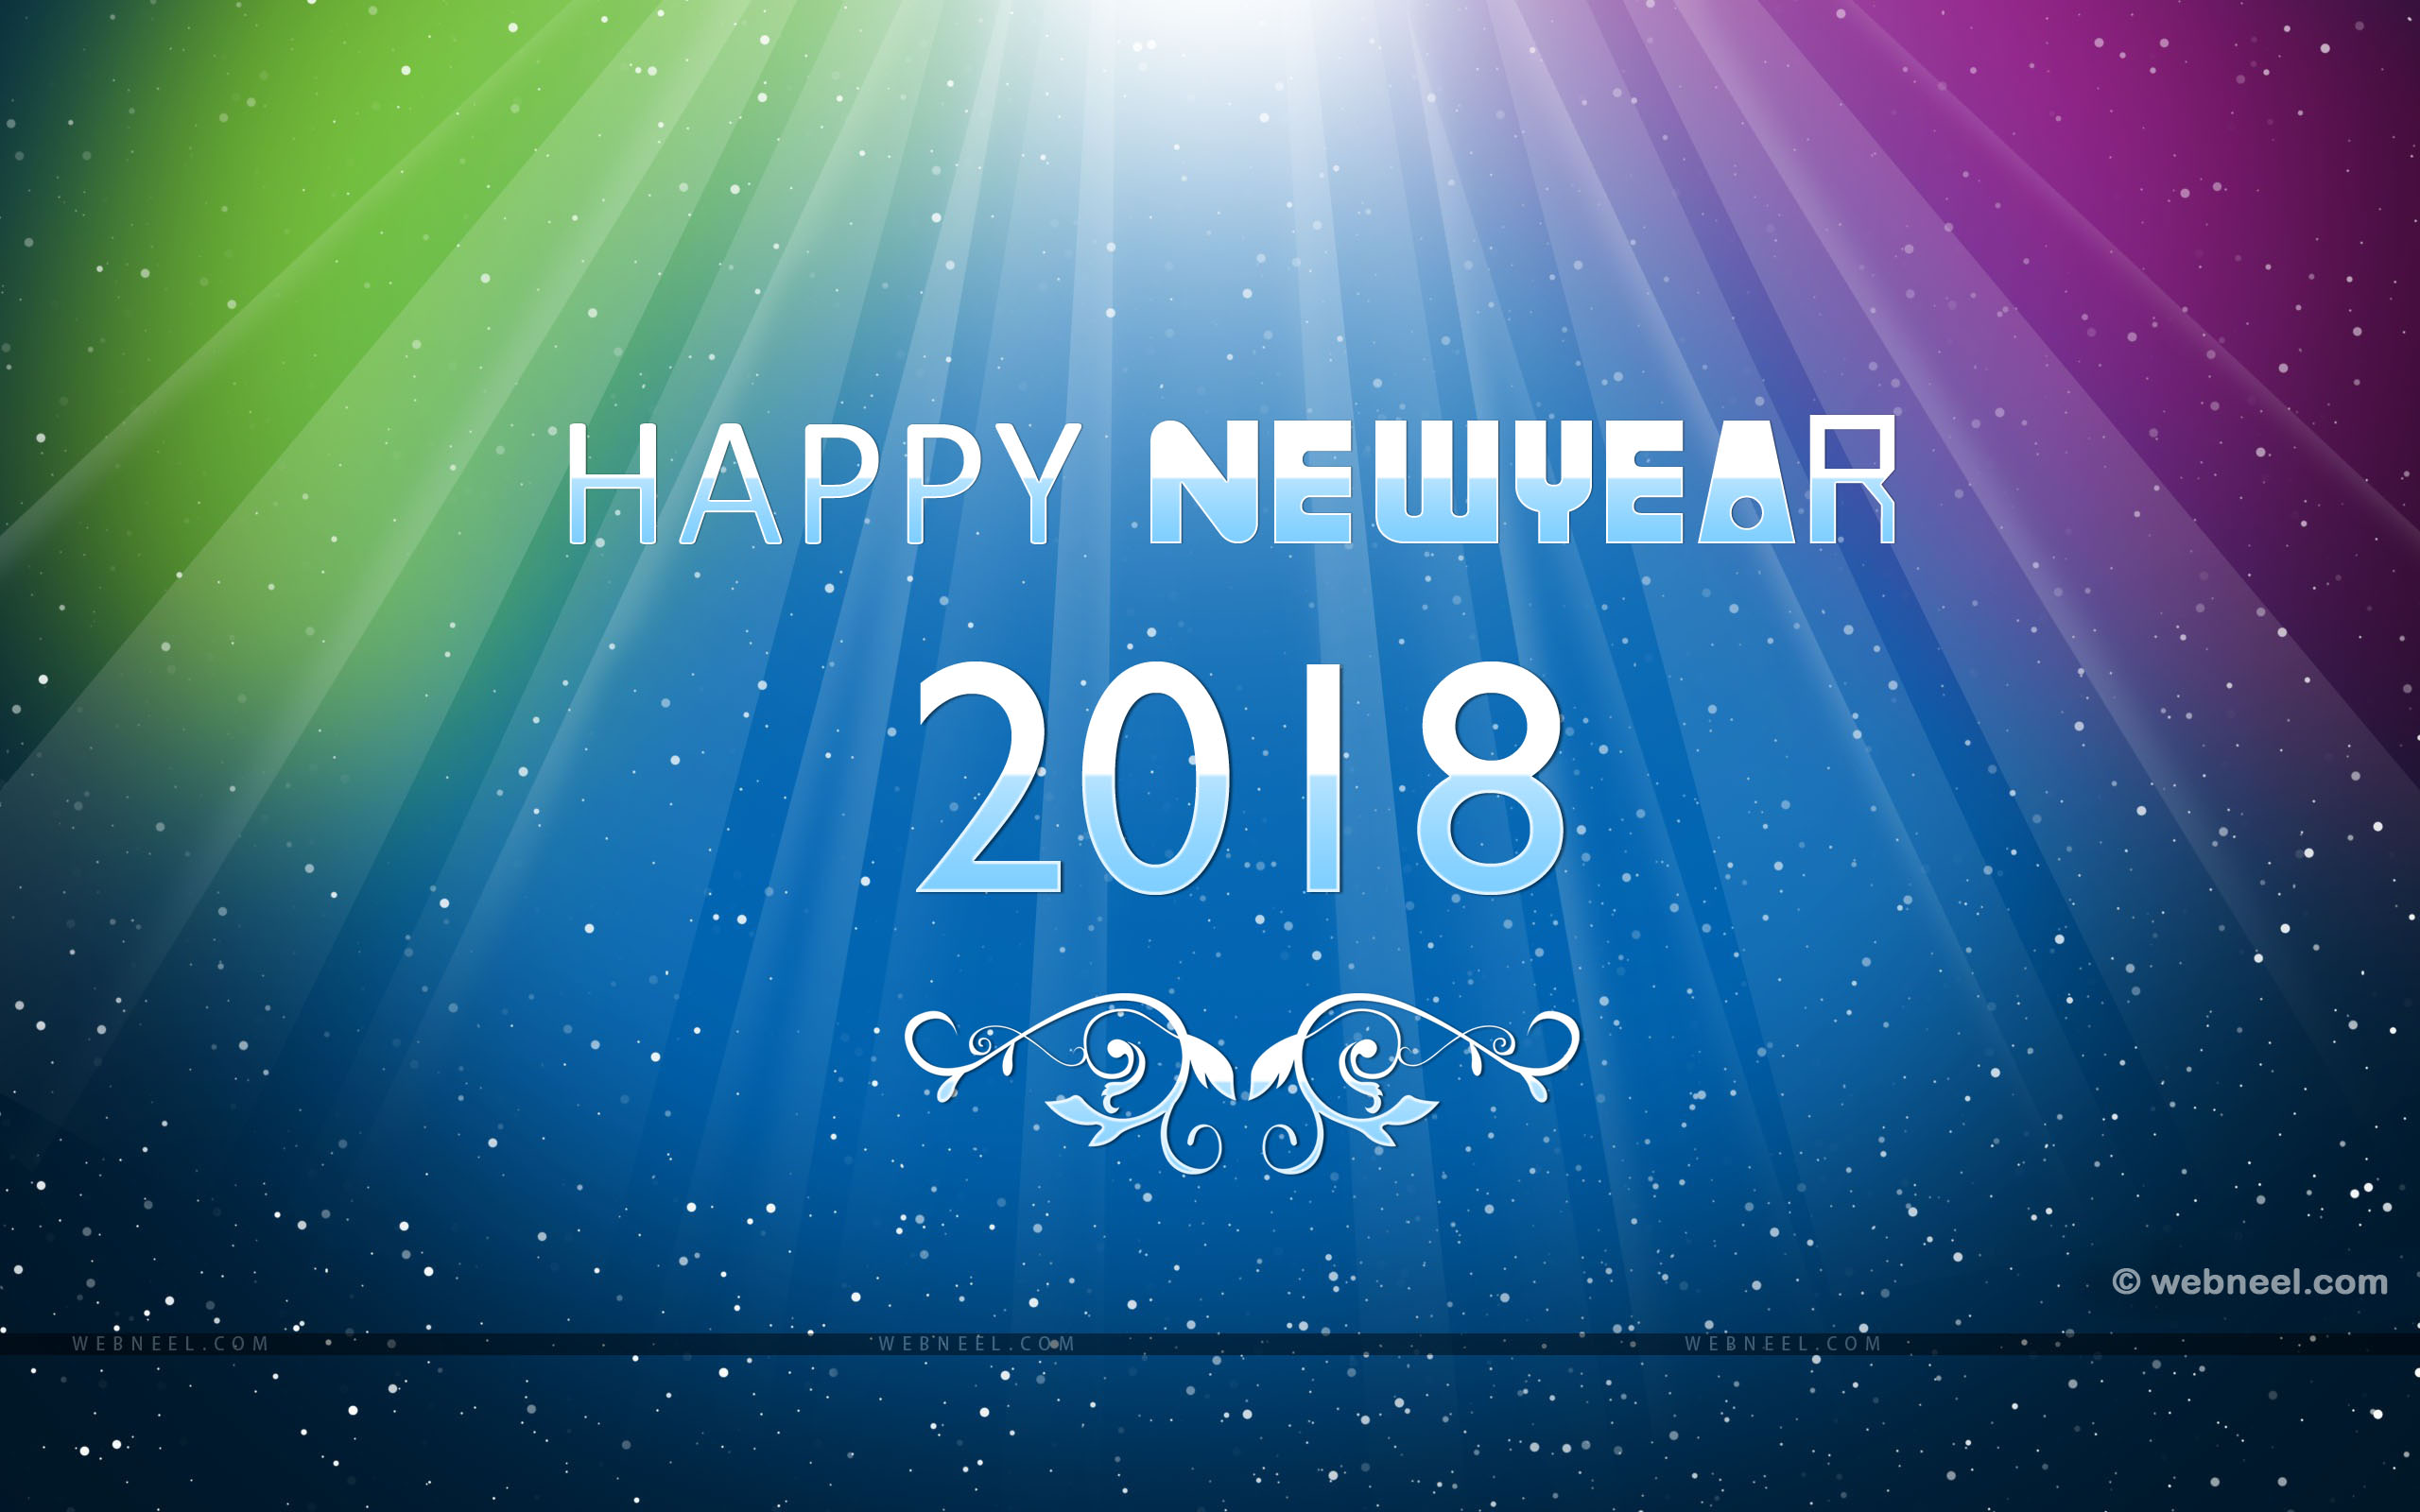 New Year 2018 Wallpaper Hd New Years Wallpapers Happy HD Wallpapers Download Free Images Wallpaper [wallpaper981.blogspot.com]